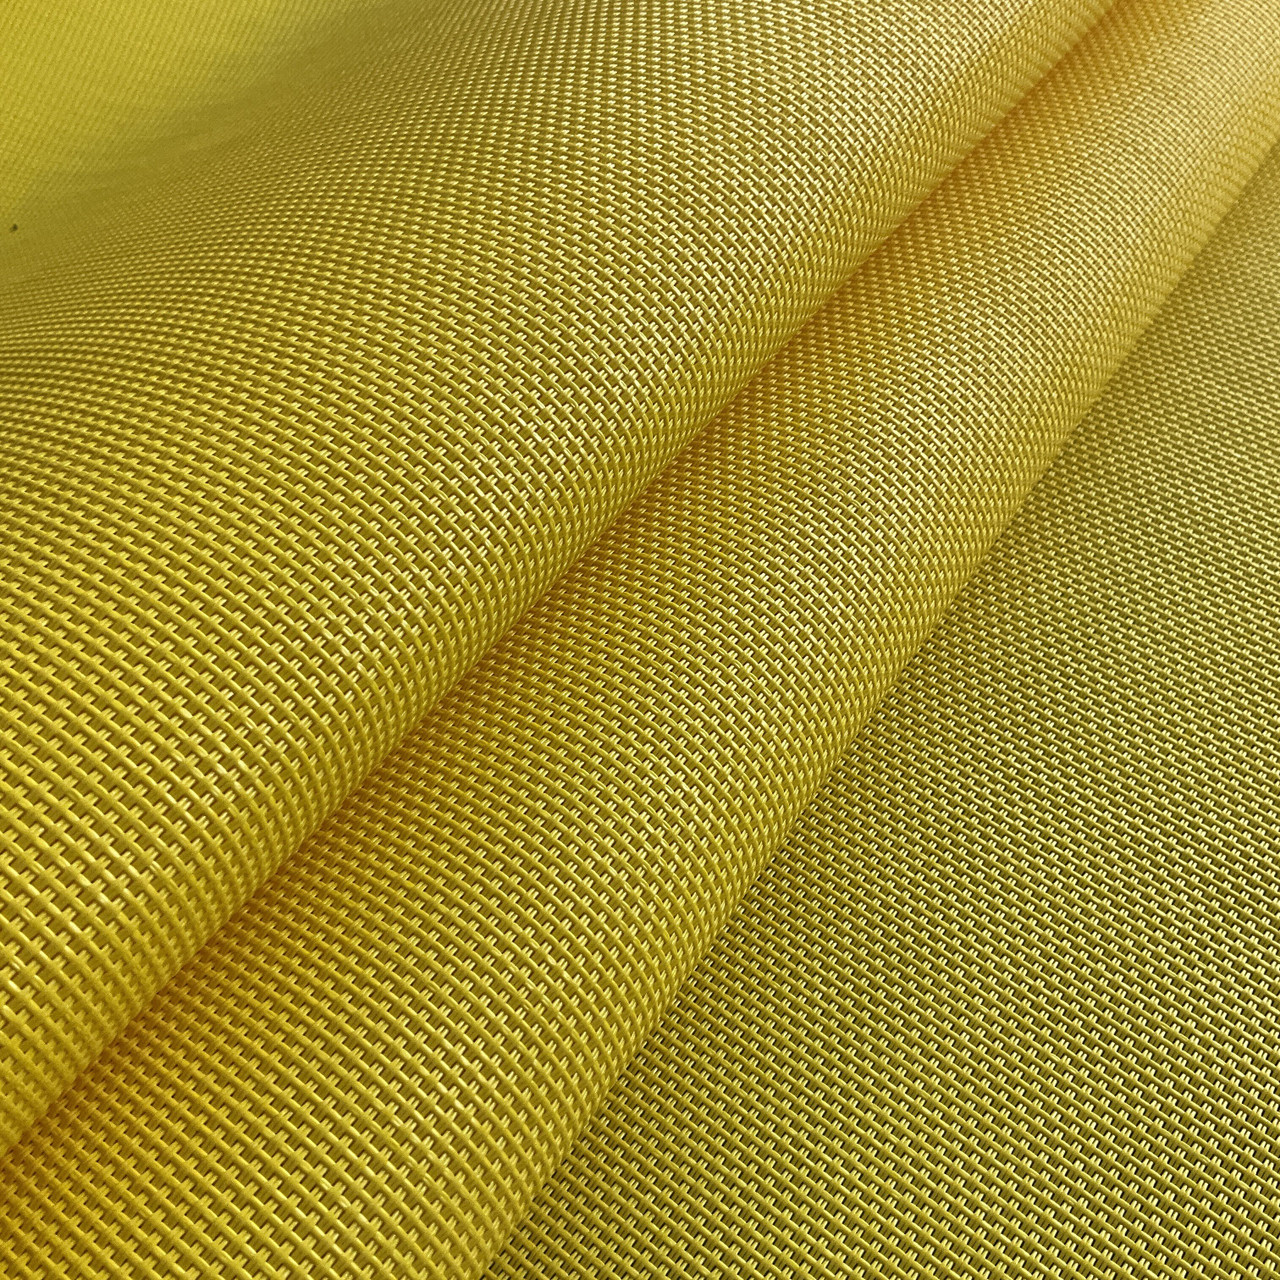 Jacquard Fabric: Here's Your 101 Explainer